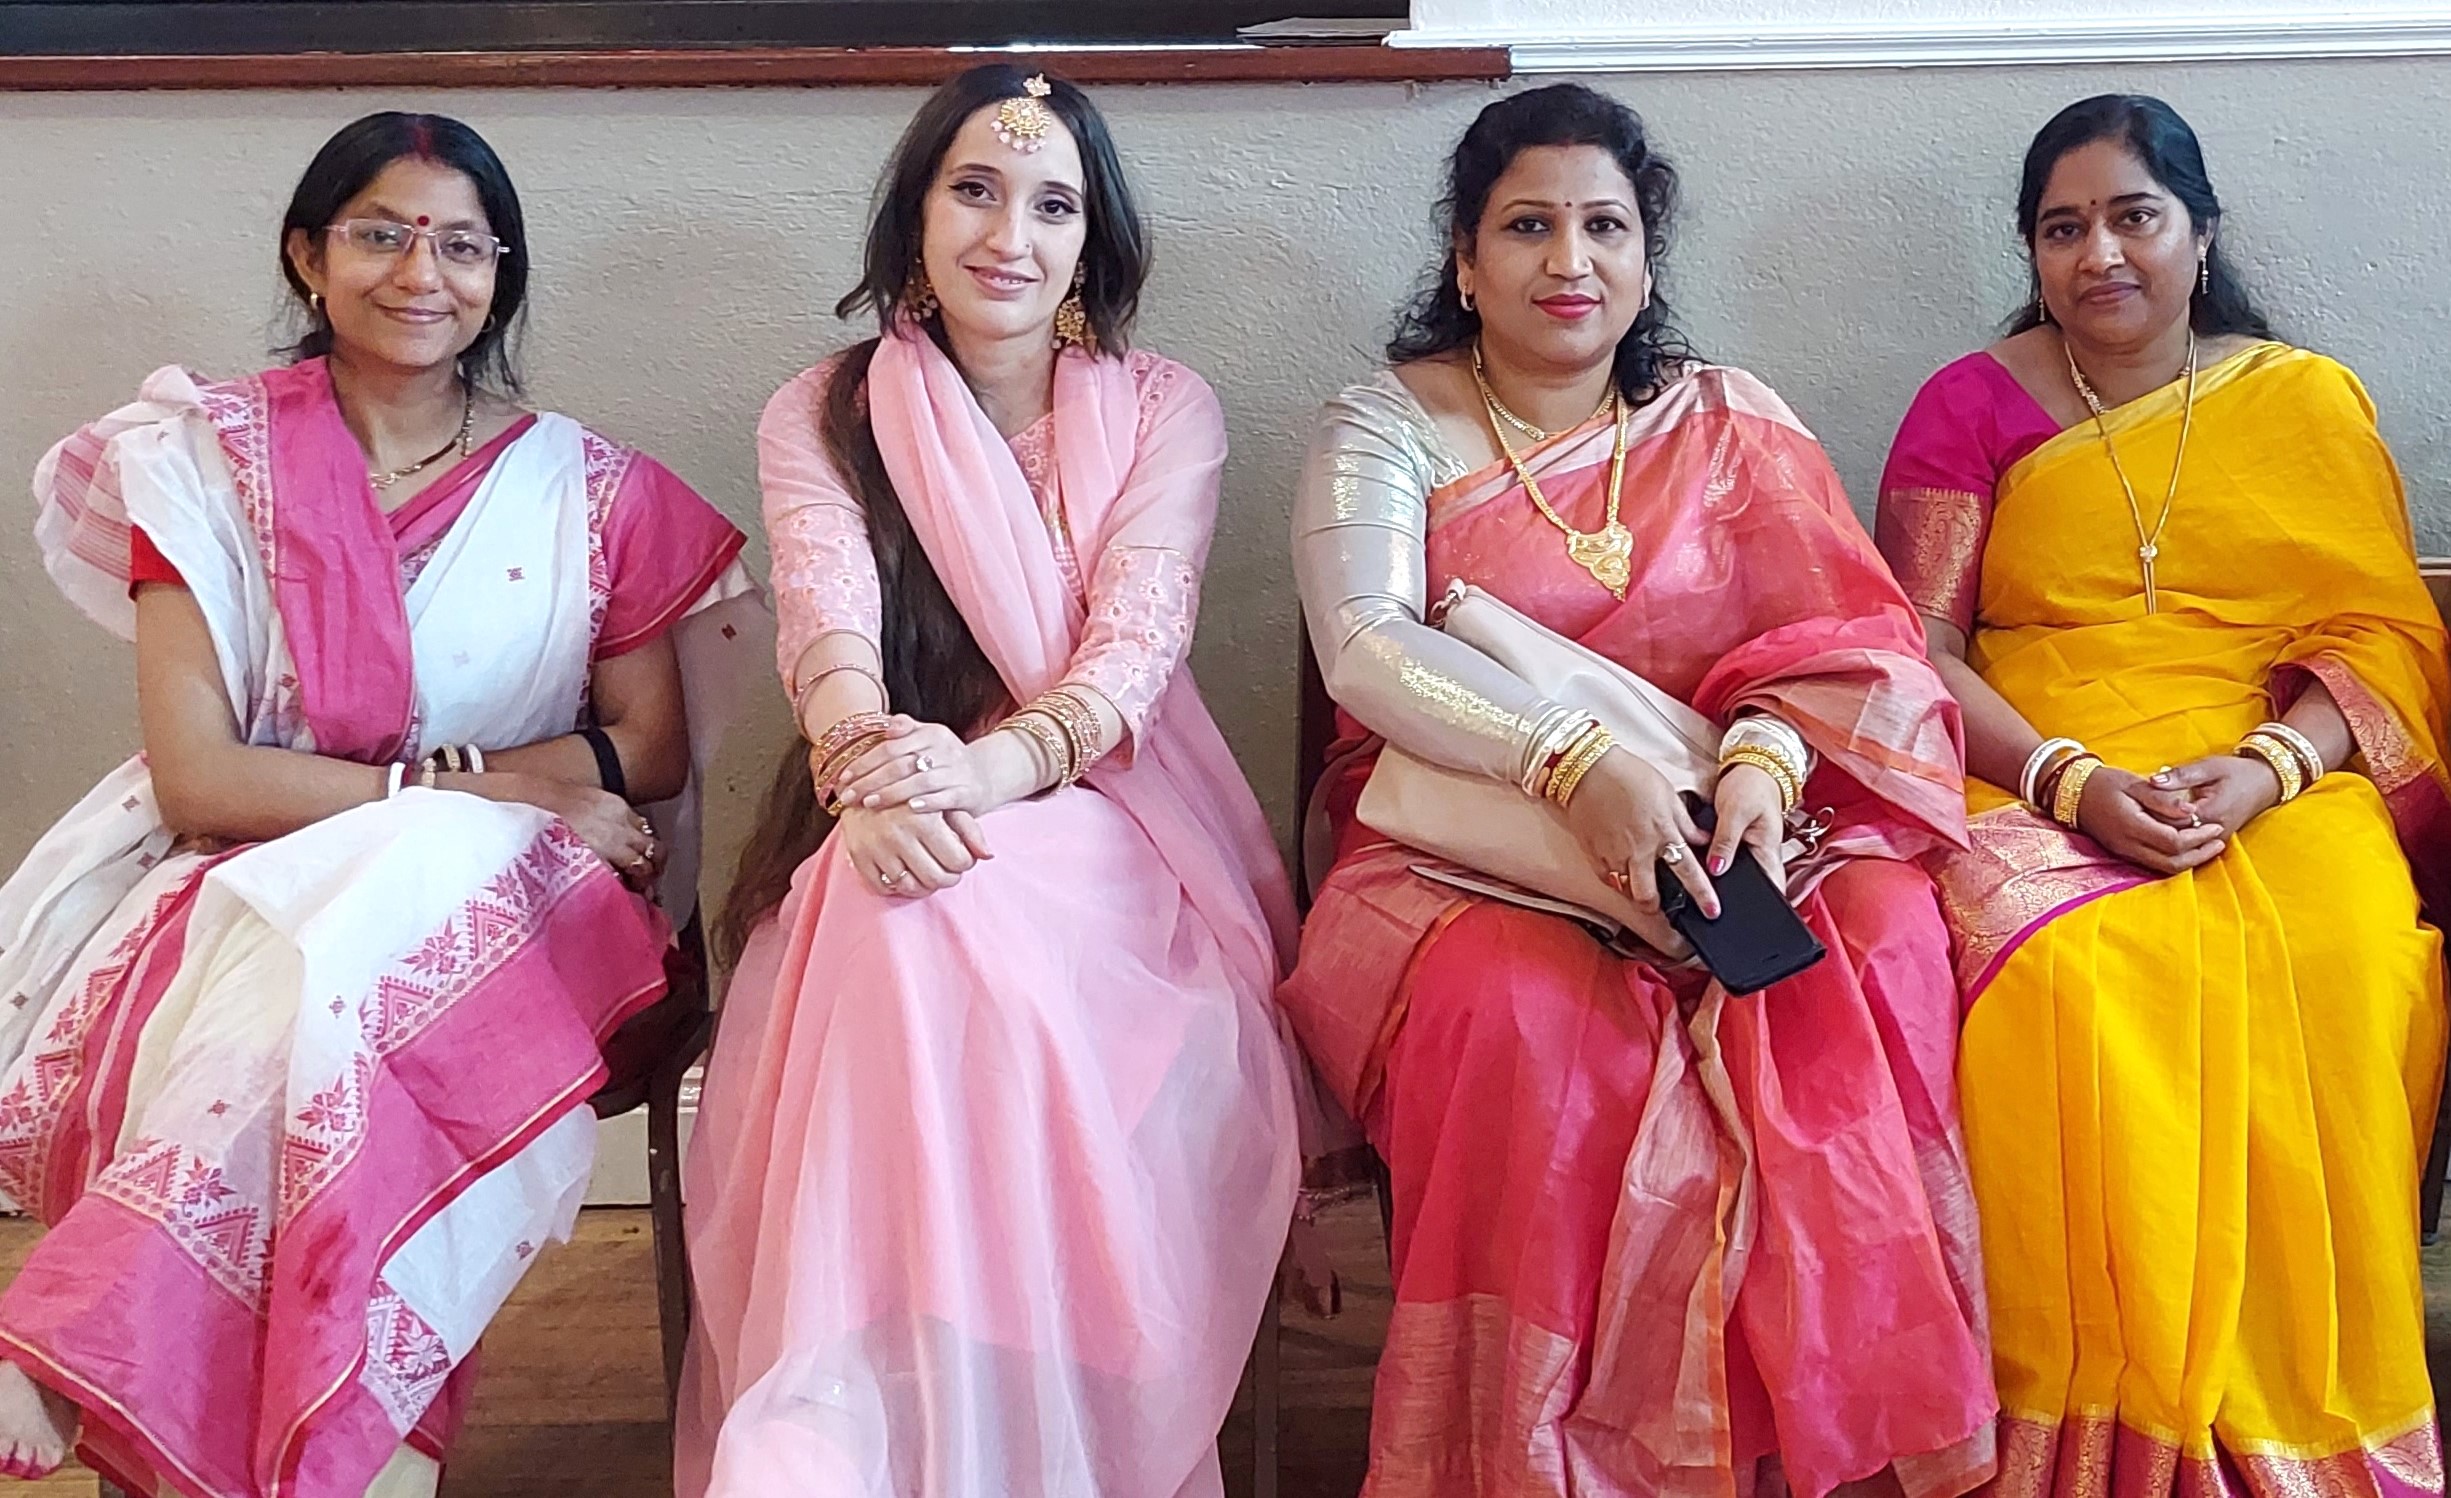 Limerick Durga Puja event - pictured are Ladies in traditional outfits enjoying the celebrations. Picture: Vinita Malu